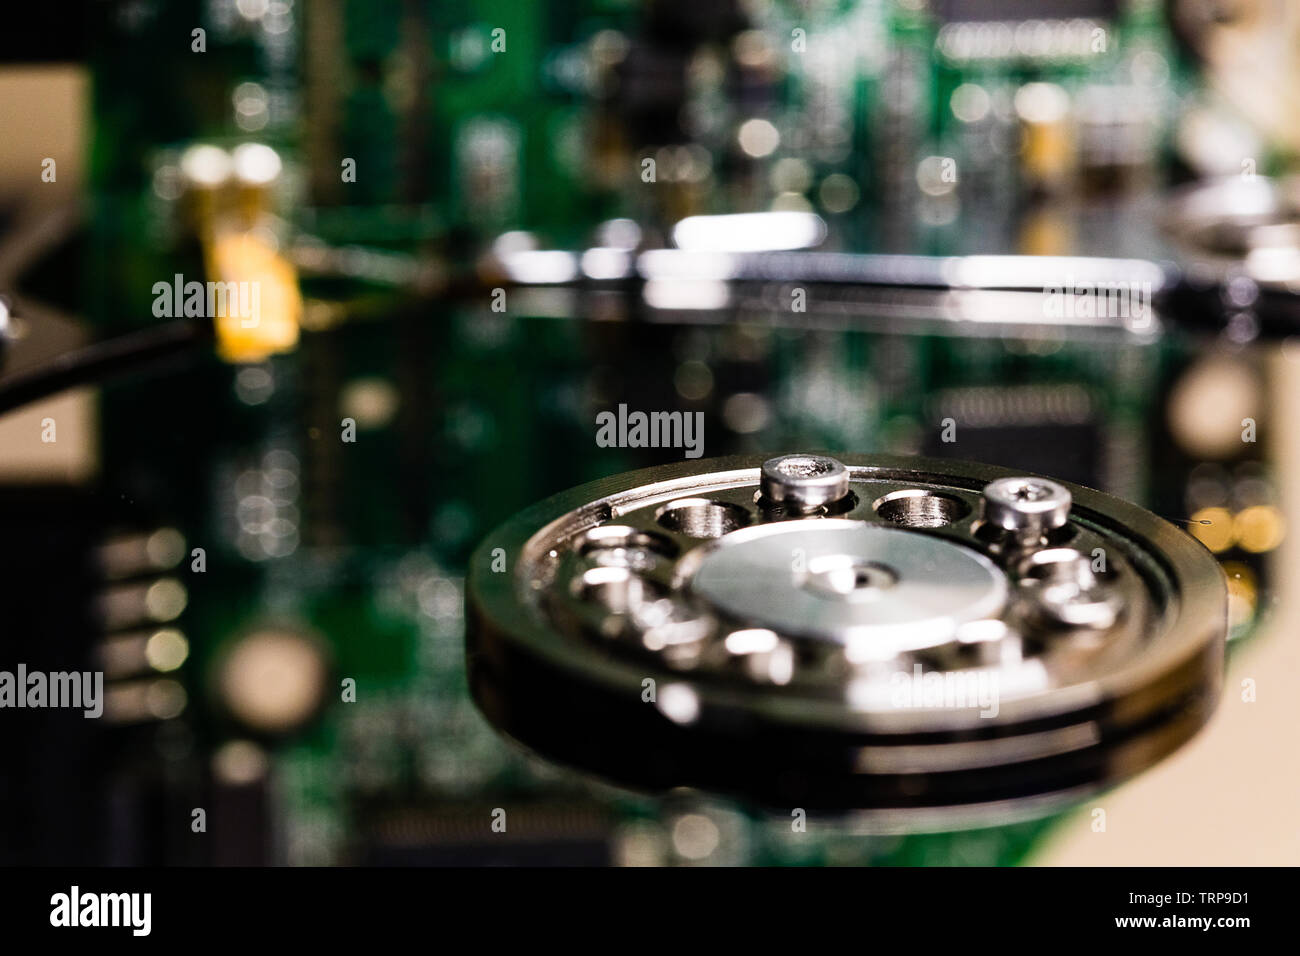 Controller circuit board and hard drive spindle and head actuator in a macro close up of a disassembled hard drive. Stock Photo